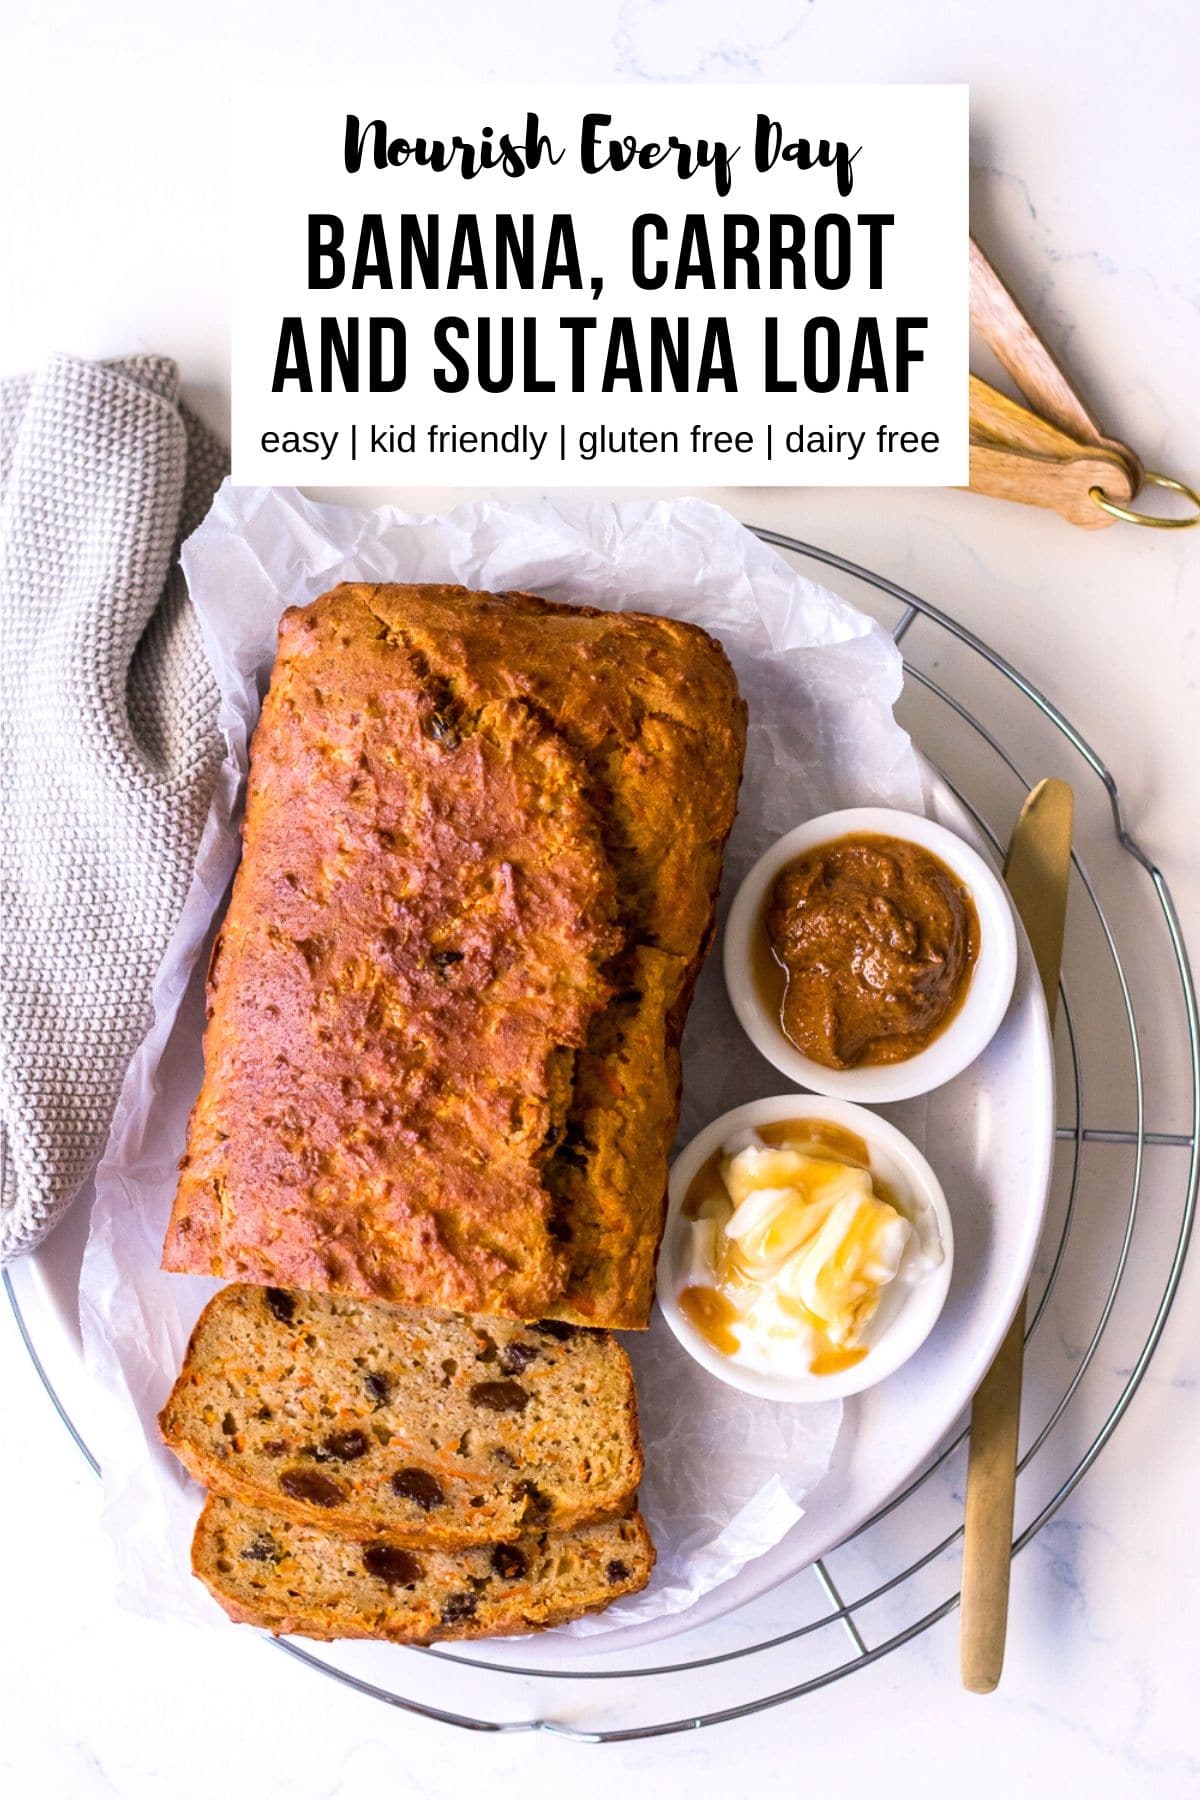 Banana, Carrot and Sultana Loaf Cake Recipe by Nourish Every Day